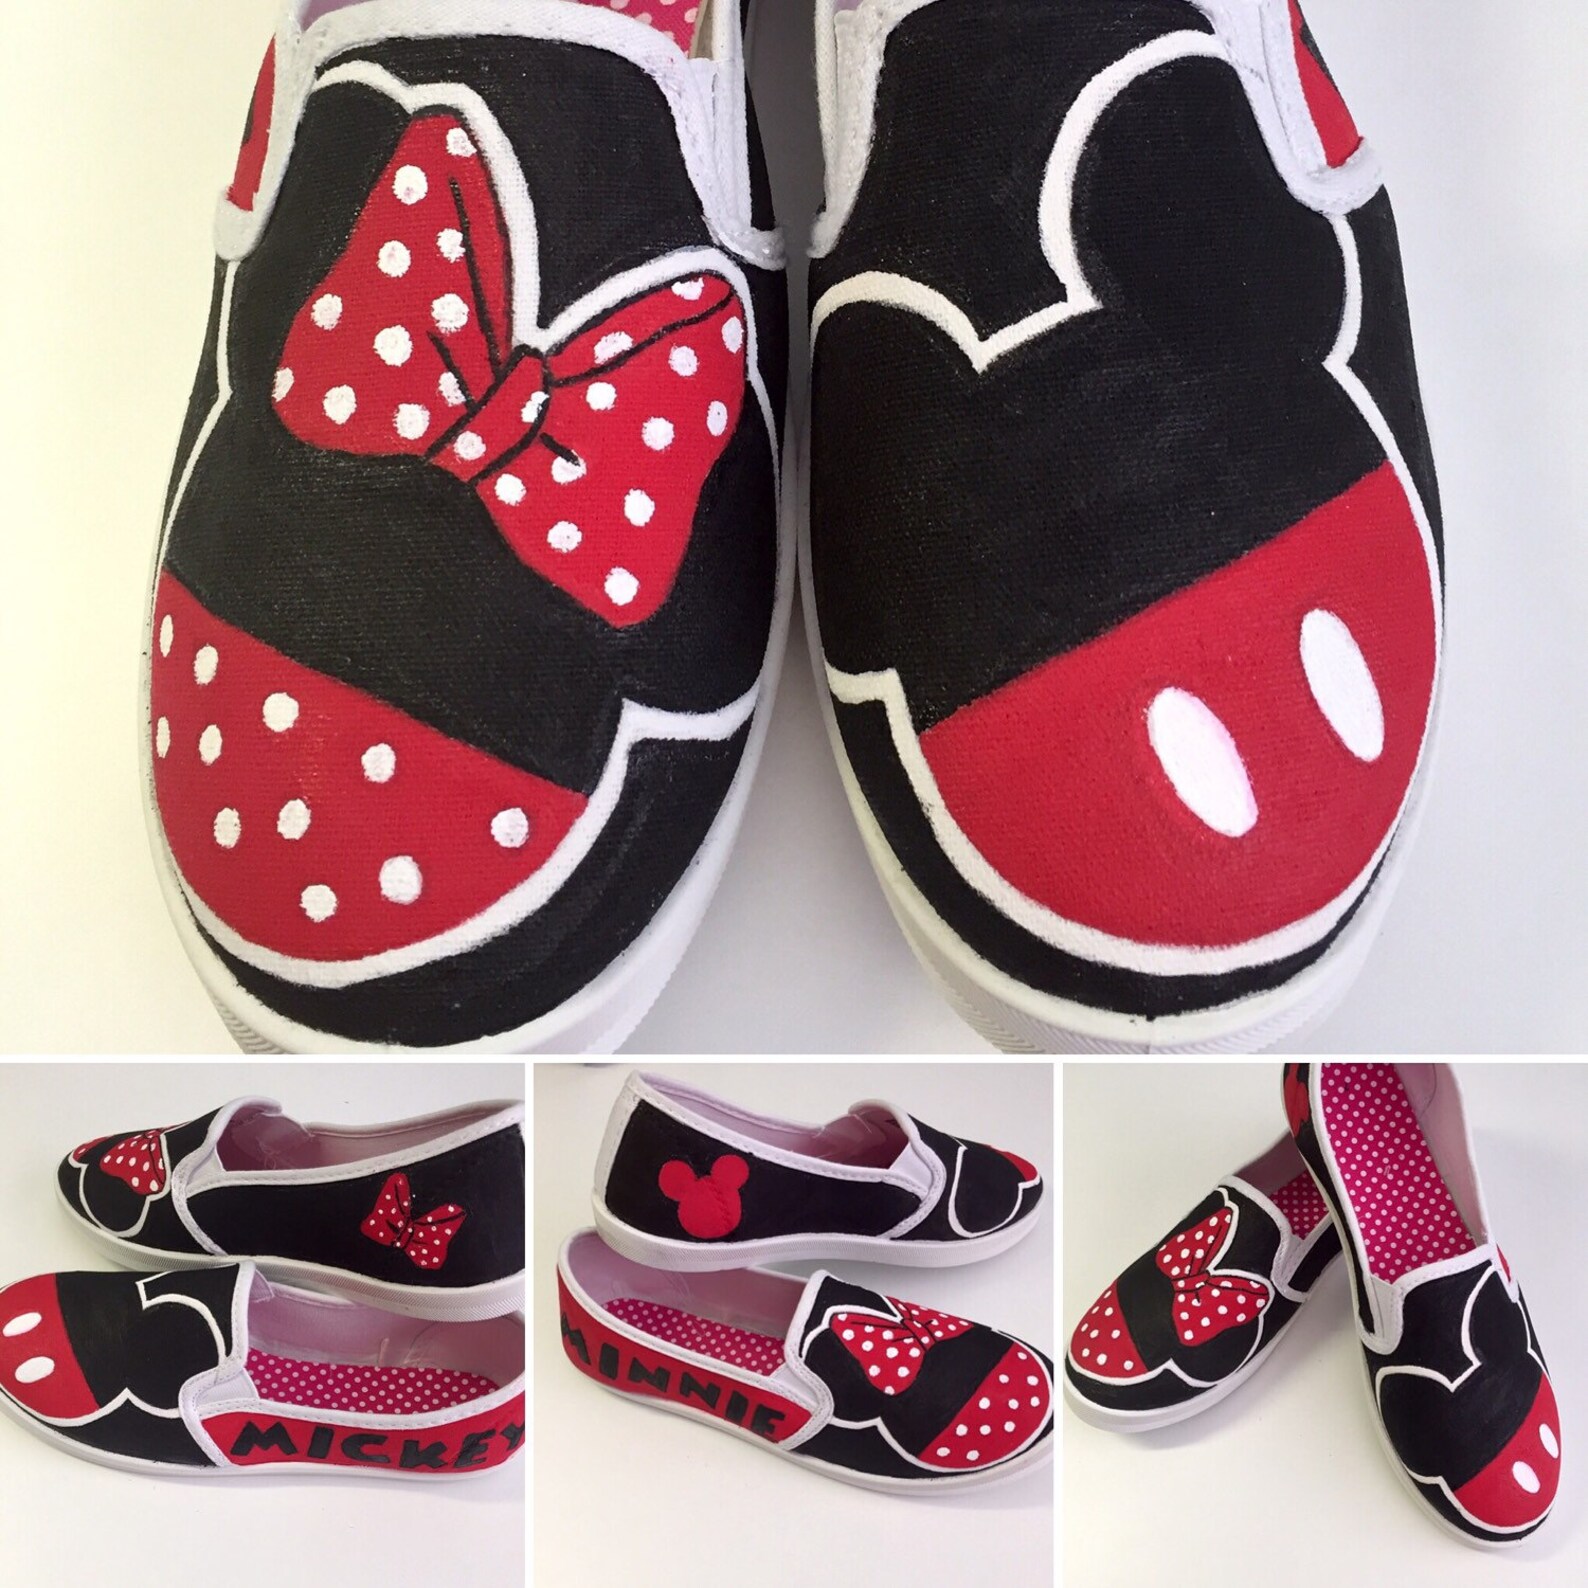 Mickey and Minnie silhouette painted canvas shoes | Etsy